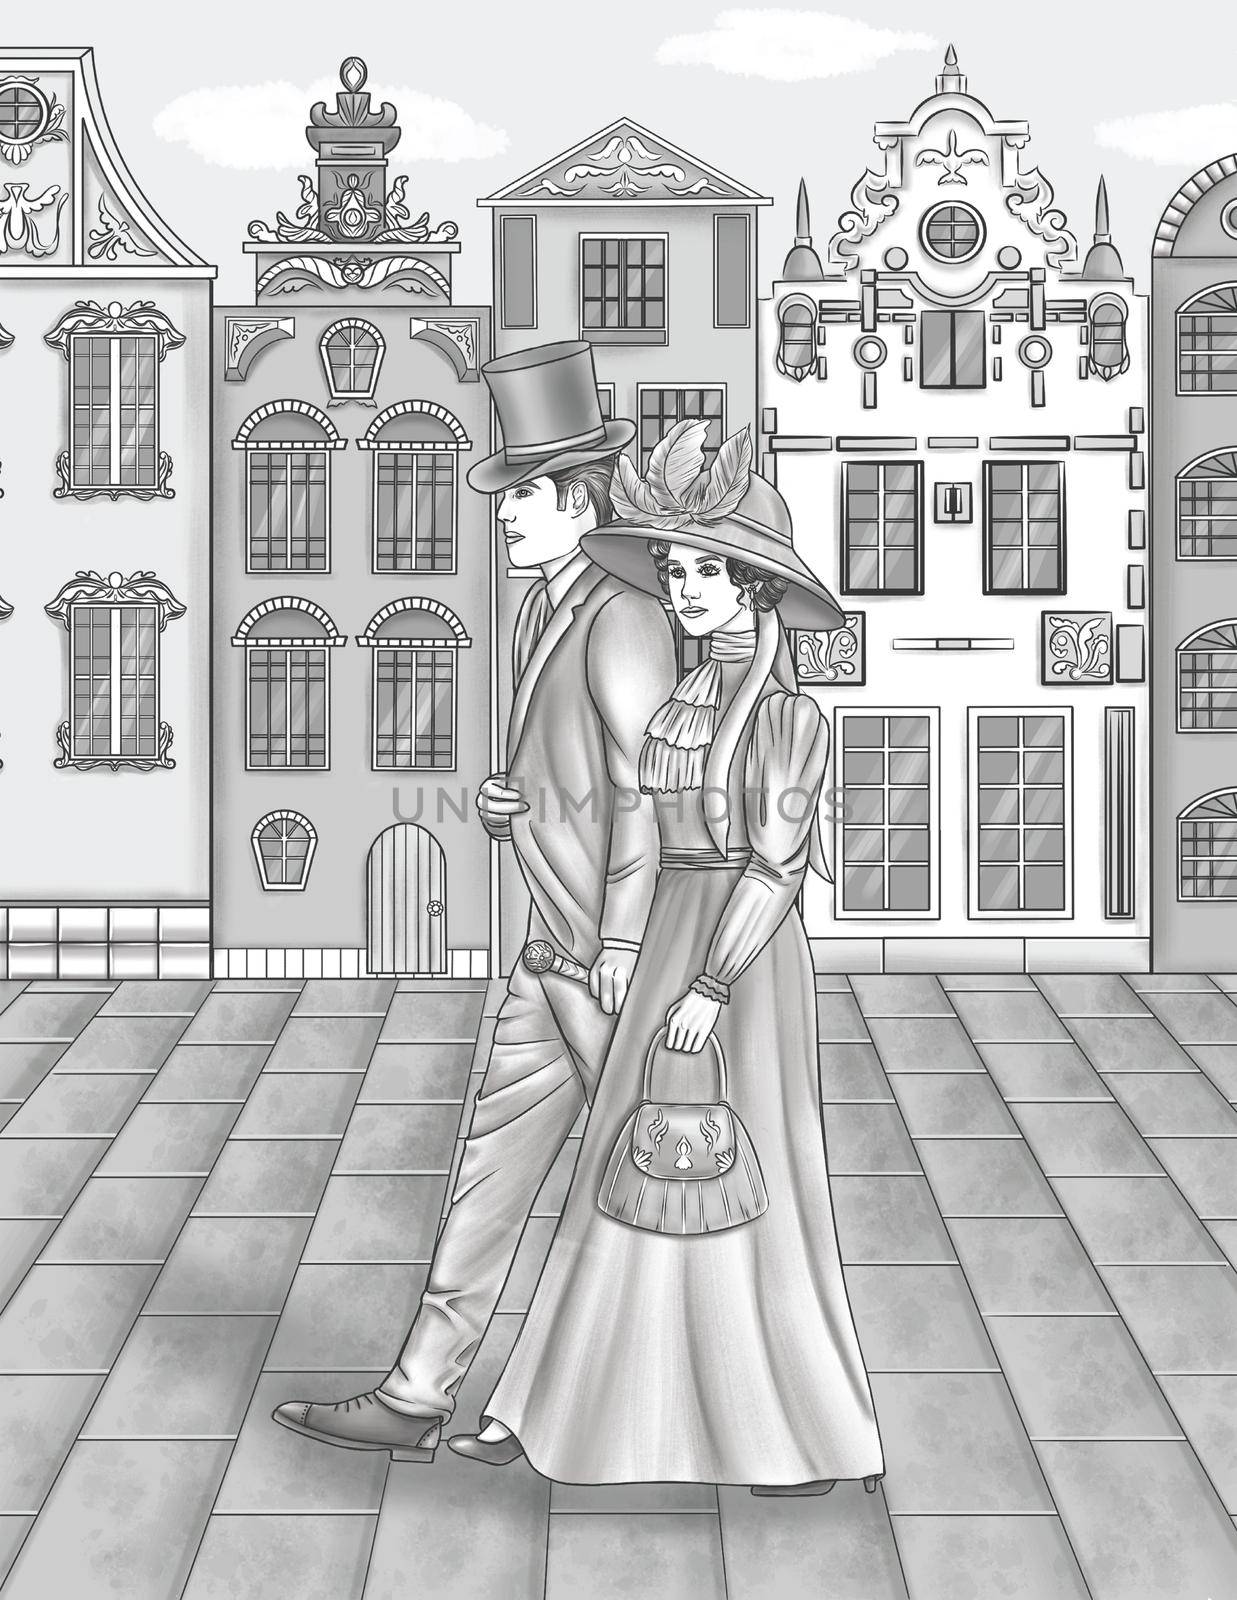 Man In Suit And Woman In Dress Walking On The Streets With Tall Structures Colorless Line Drawing. Lady And Gentleman Walks Pathway Large Buildings Coloring Book Page. by nialowwa